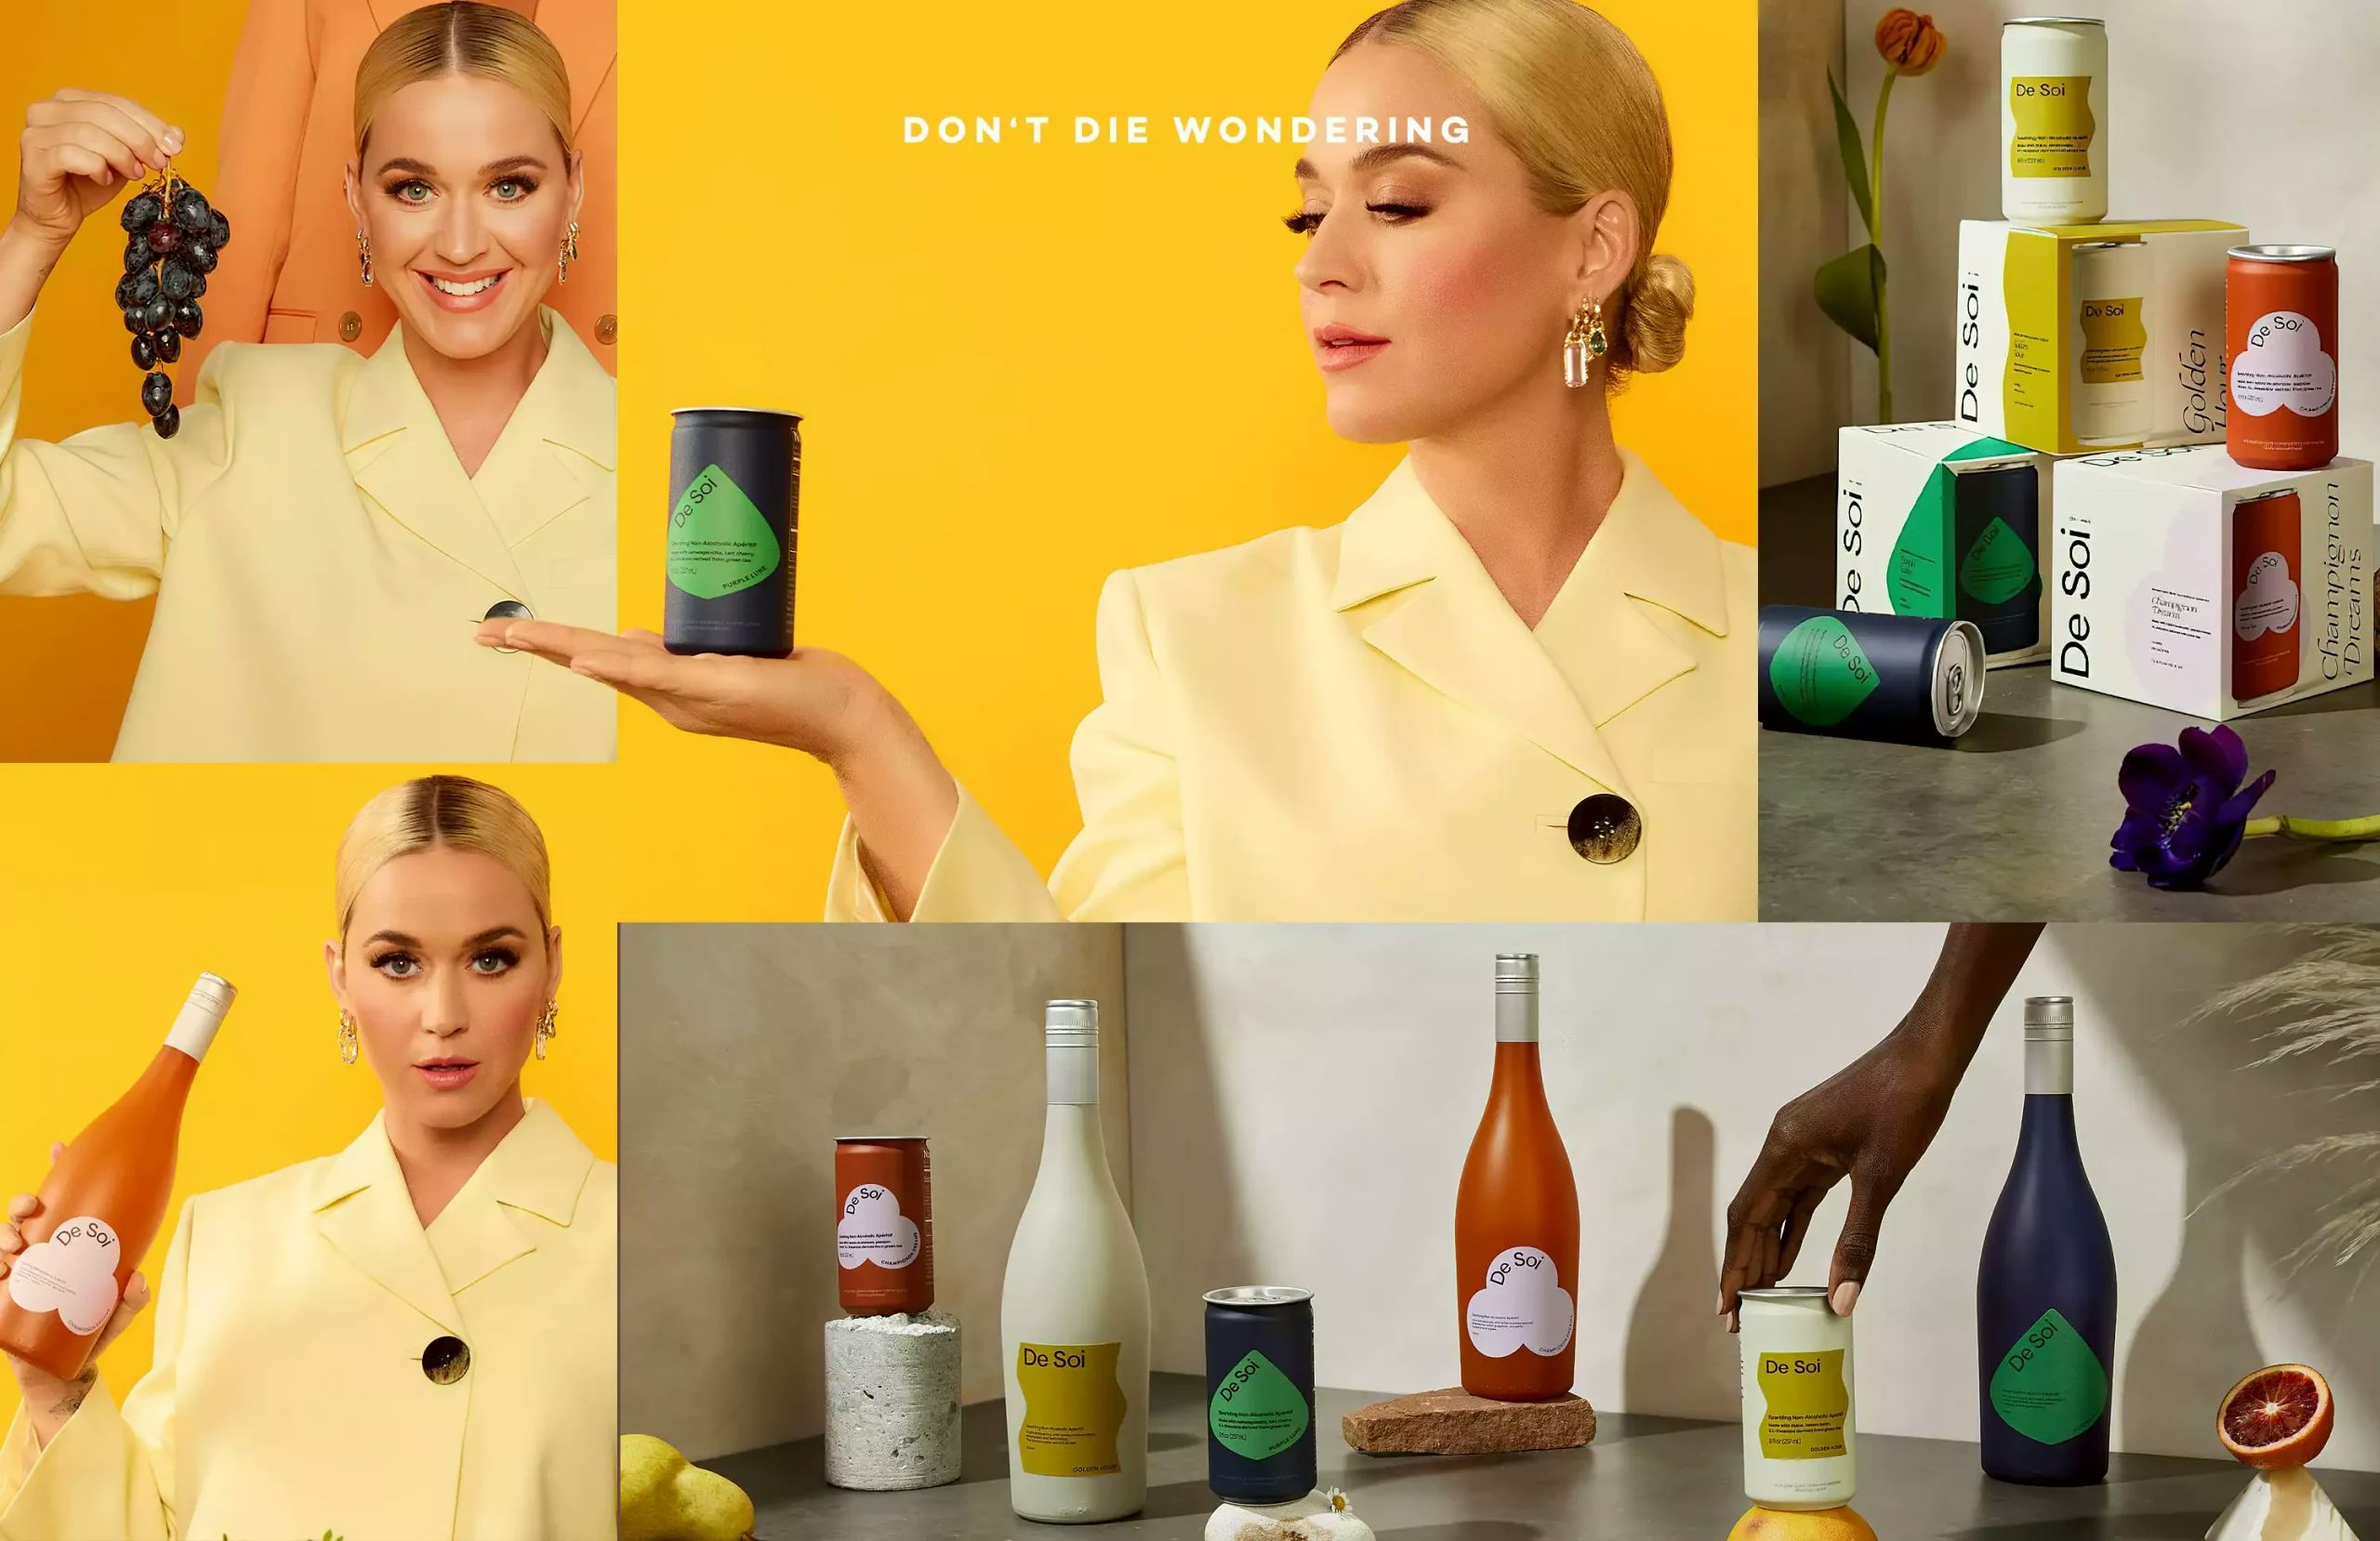 De Soi | Katy Perry’s Line of Non-Alcoholic Aperitifs Is Brighter Than Ever